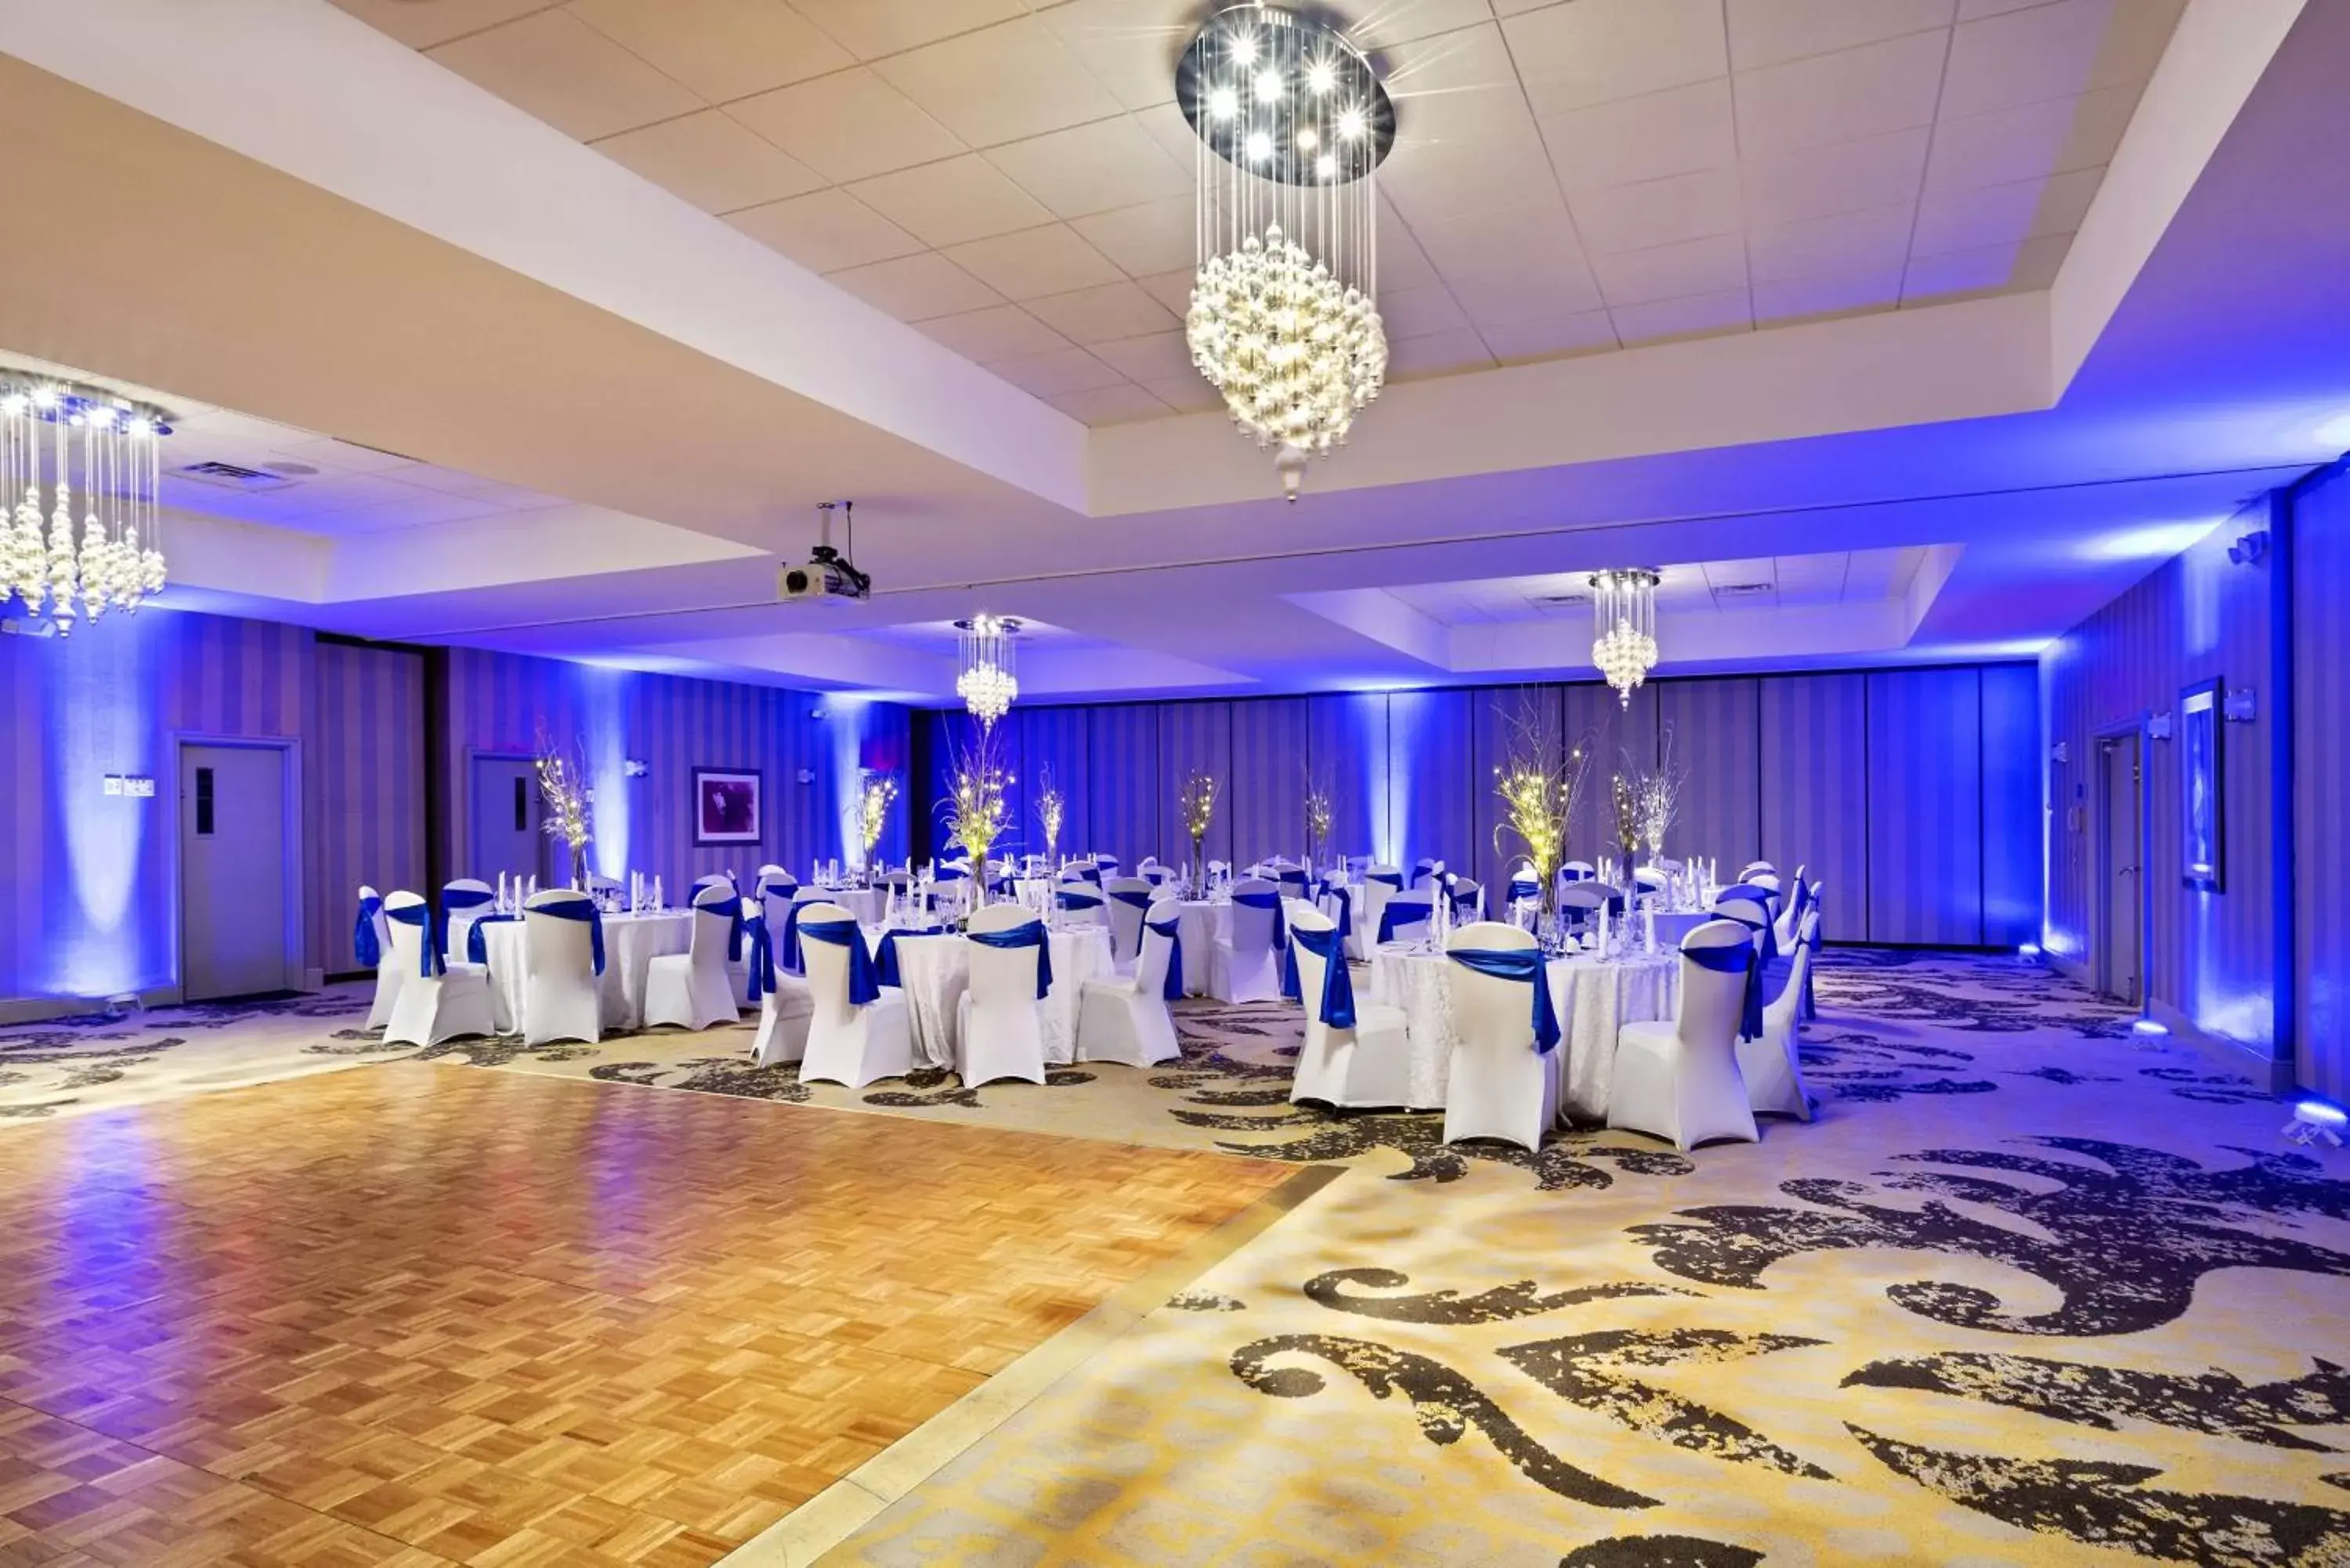 Meeting/conference room, Banquet Facilities in DoubleTree by Hilton Orlando East - UCF Area